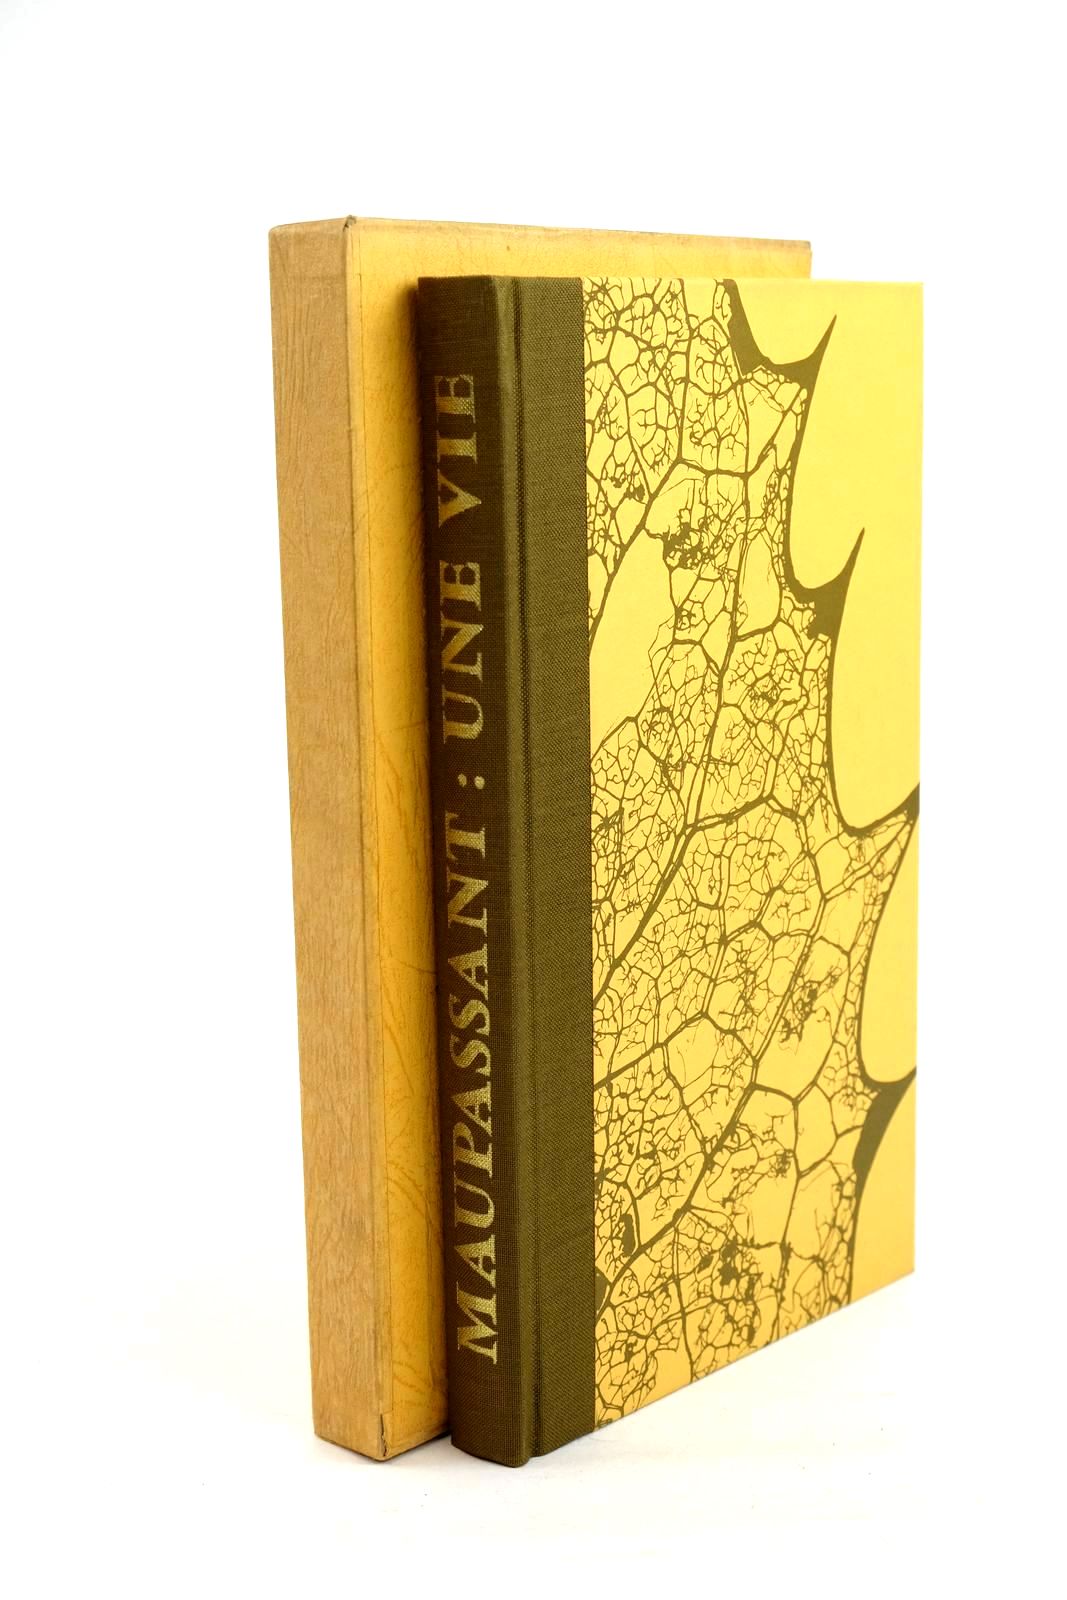 Photo of UNE VIE written by De Maupassant, Guy illustrated by Acs, Laszlo published by Folio Society (STOCK CODE: 1320400)  for sale by Stella & Rose's Books